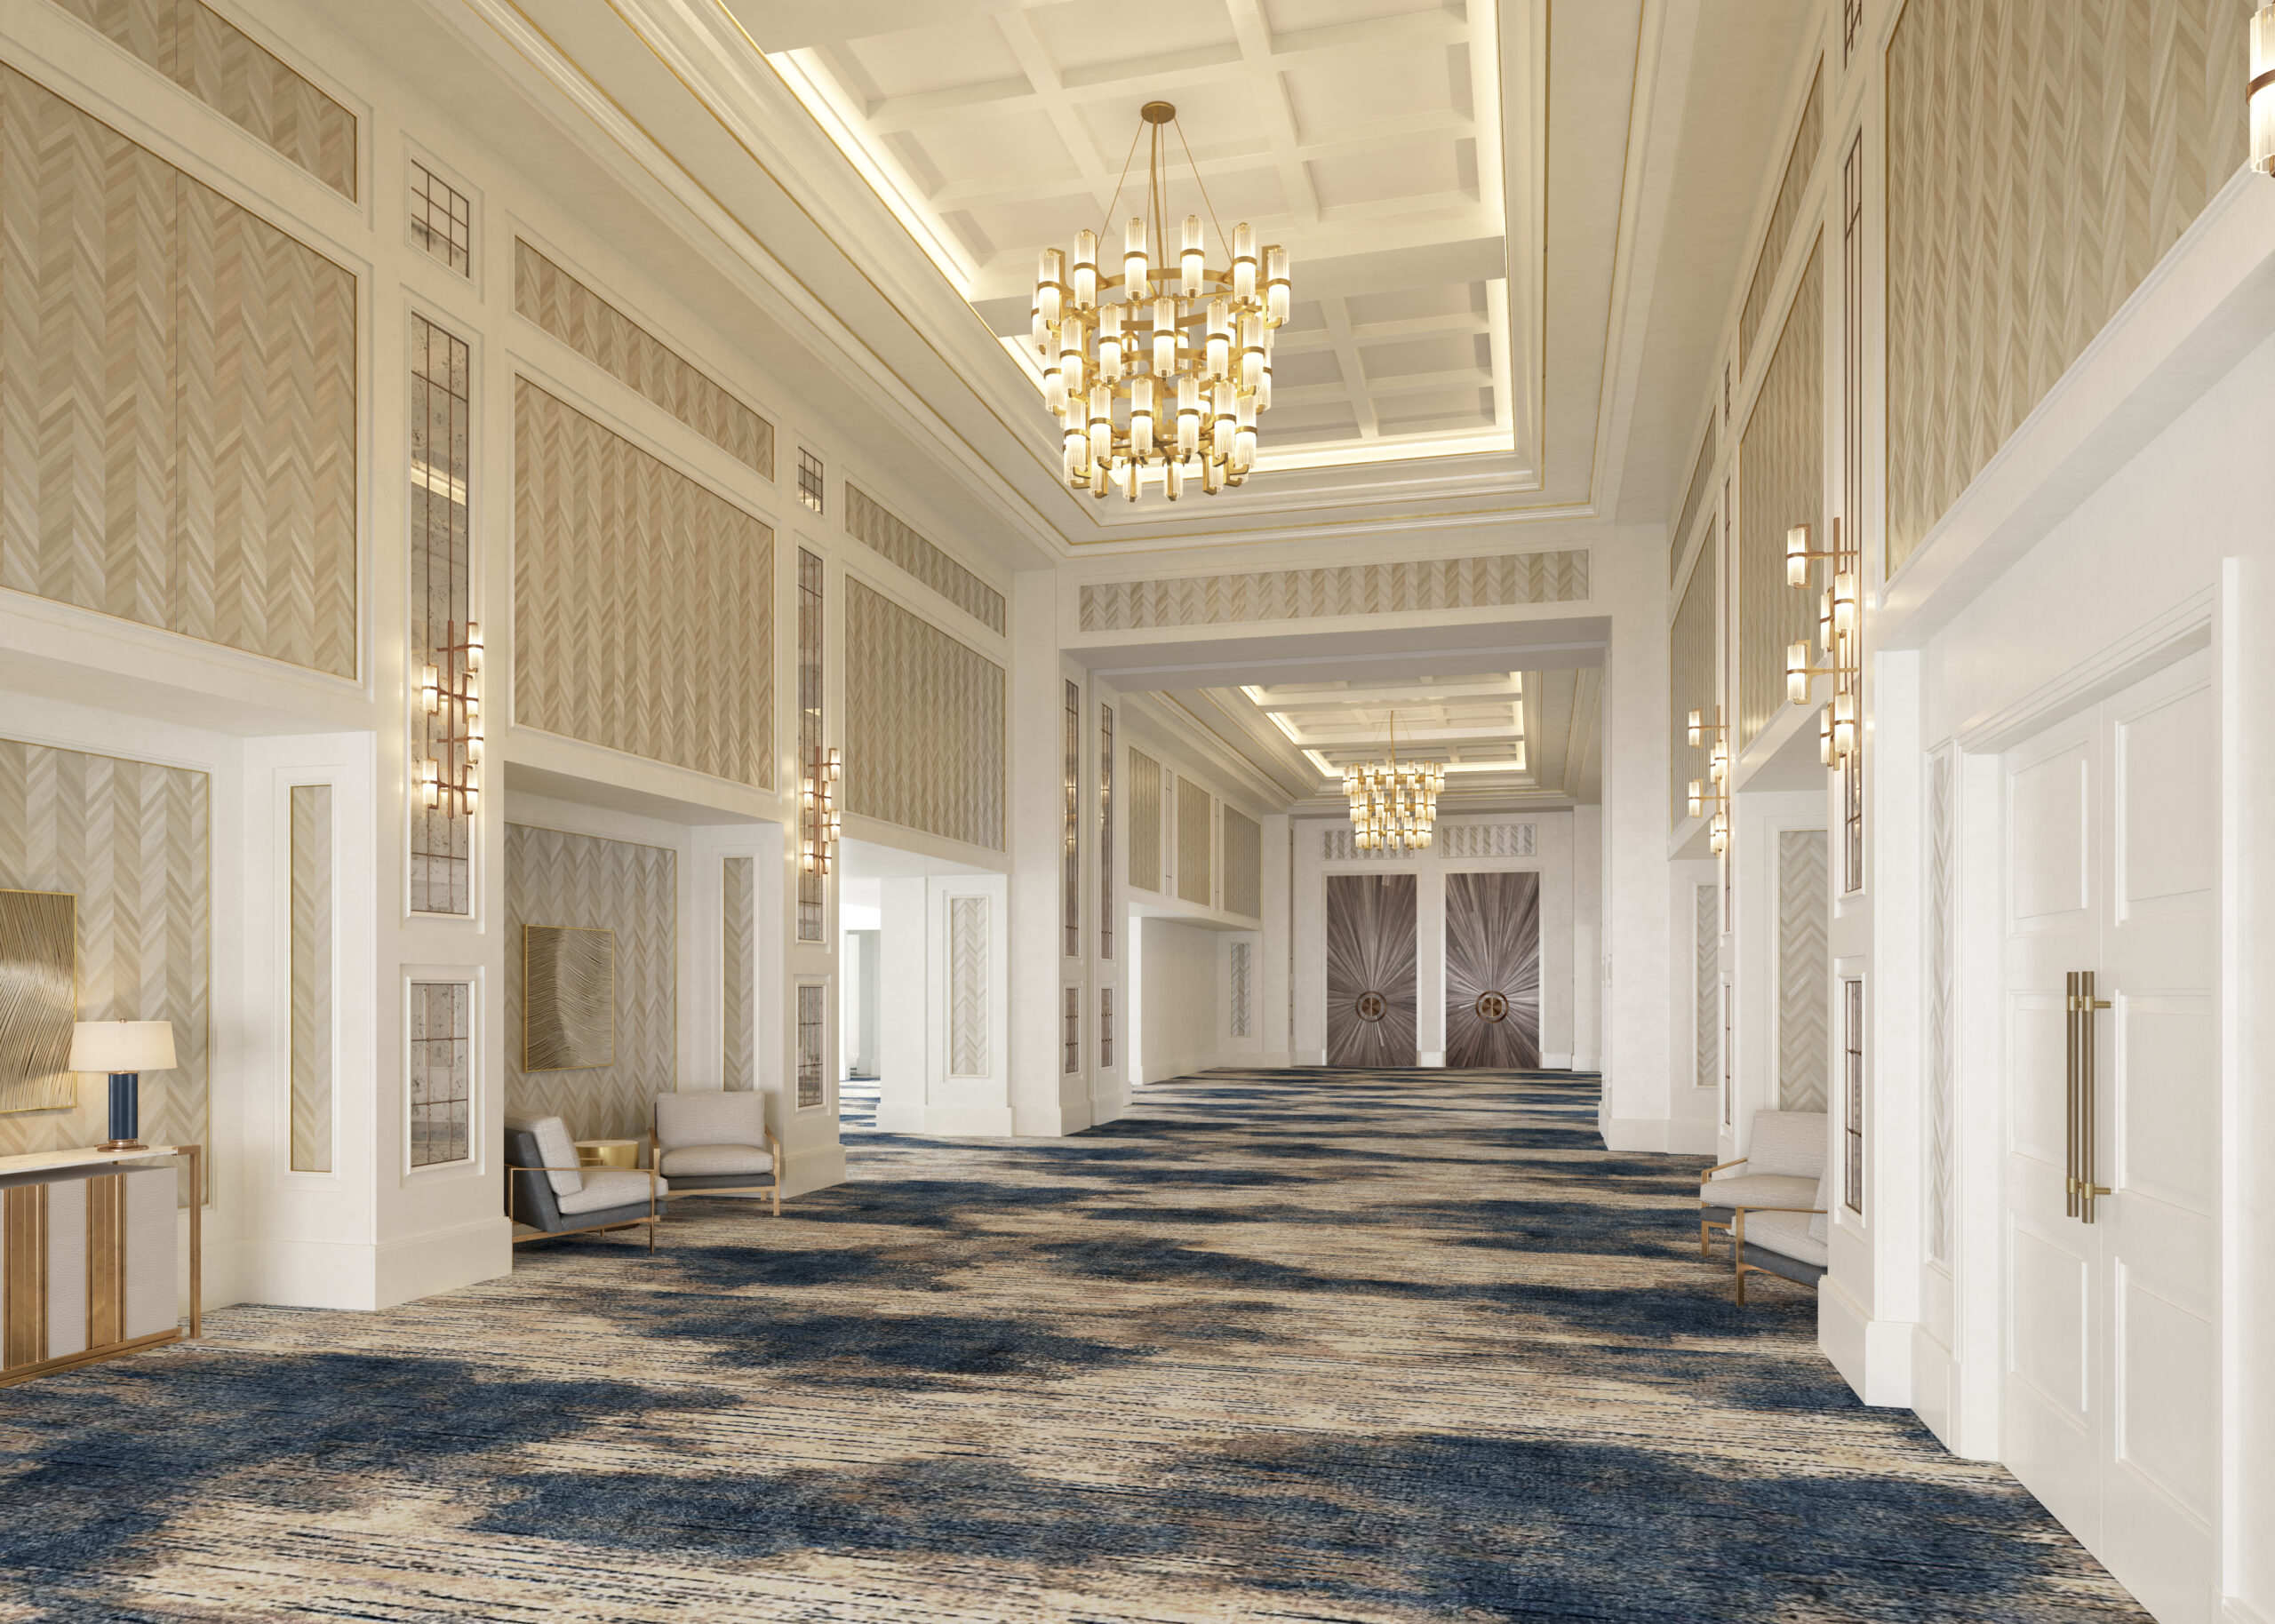 The Promenade of The Langham, Boston. The paneled walls are cream and white